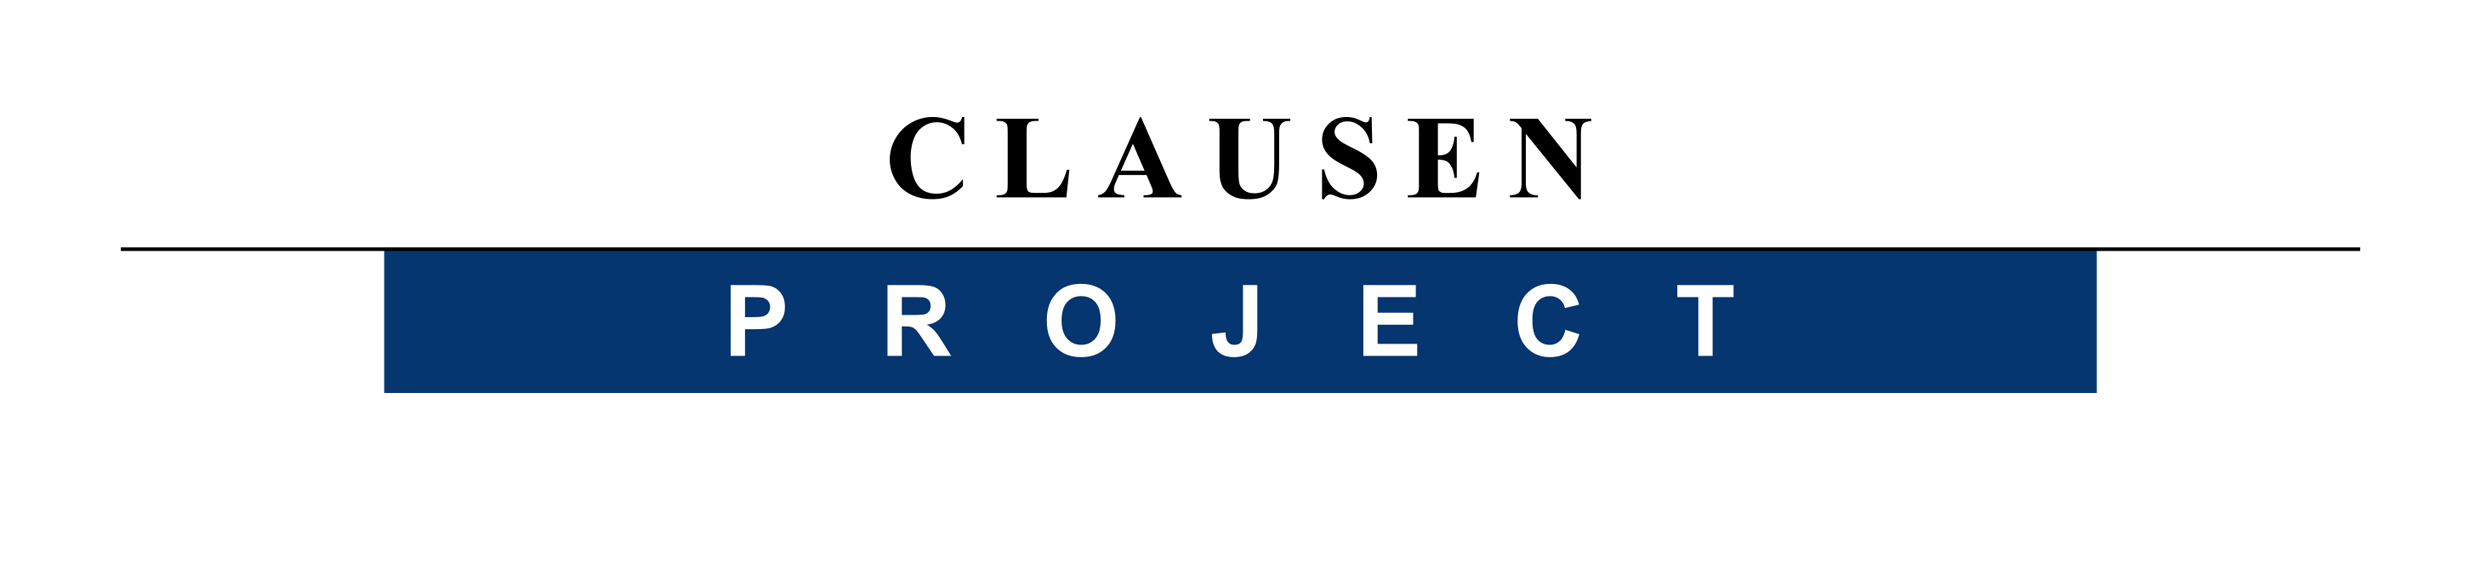 Clausen Project